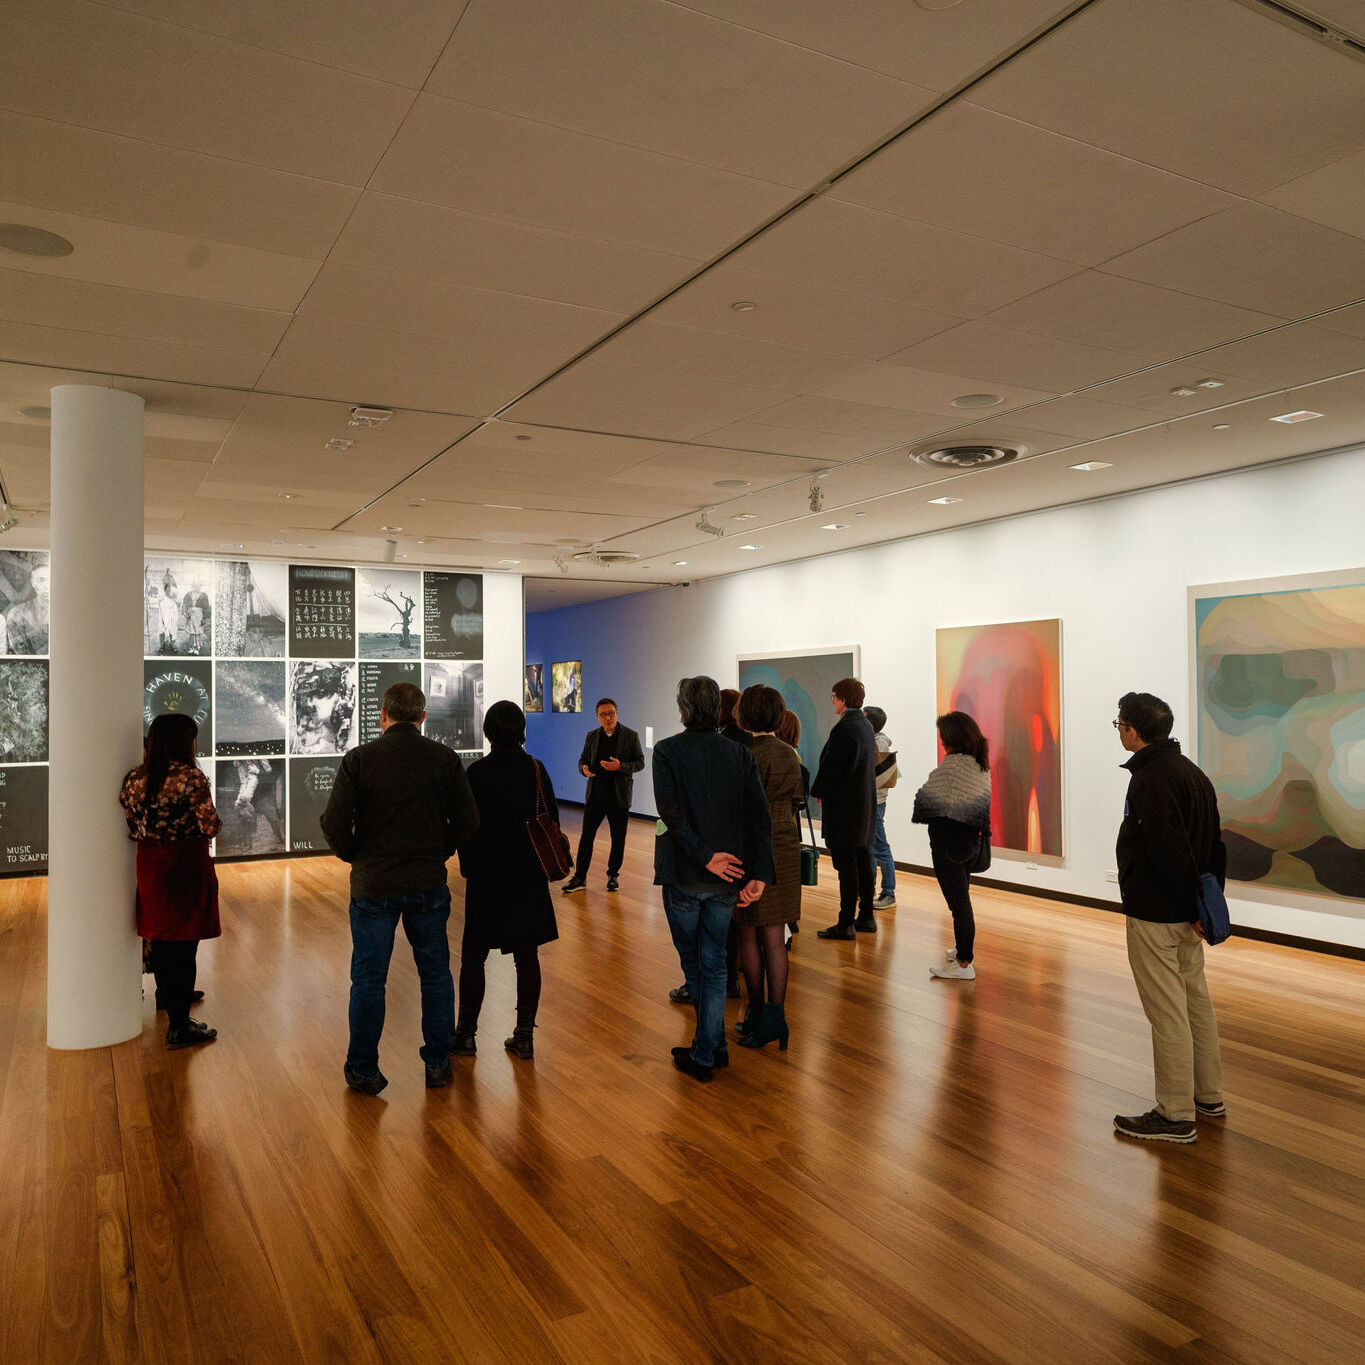 Exhibition opening at Town Hall Gallery for 'The Lives of Celestials' by John Young, displayed 31 August - 20 October 2019. Photograph by ImagePlay